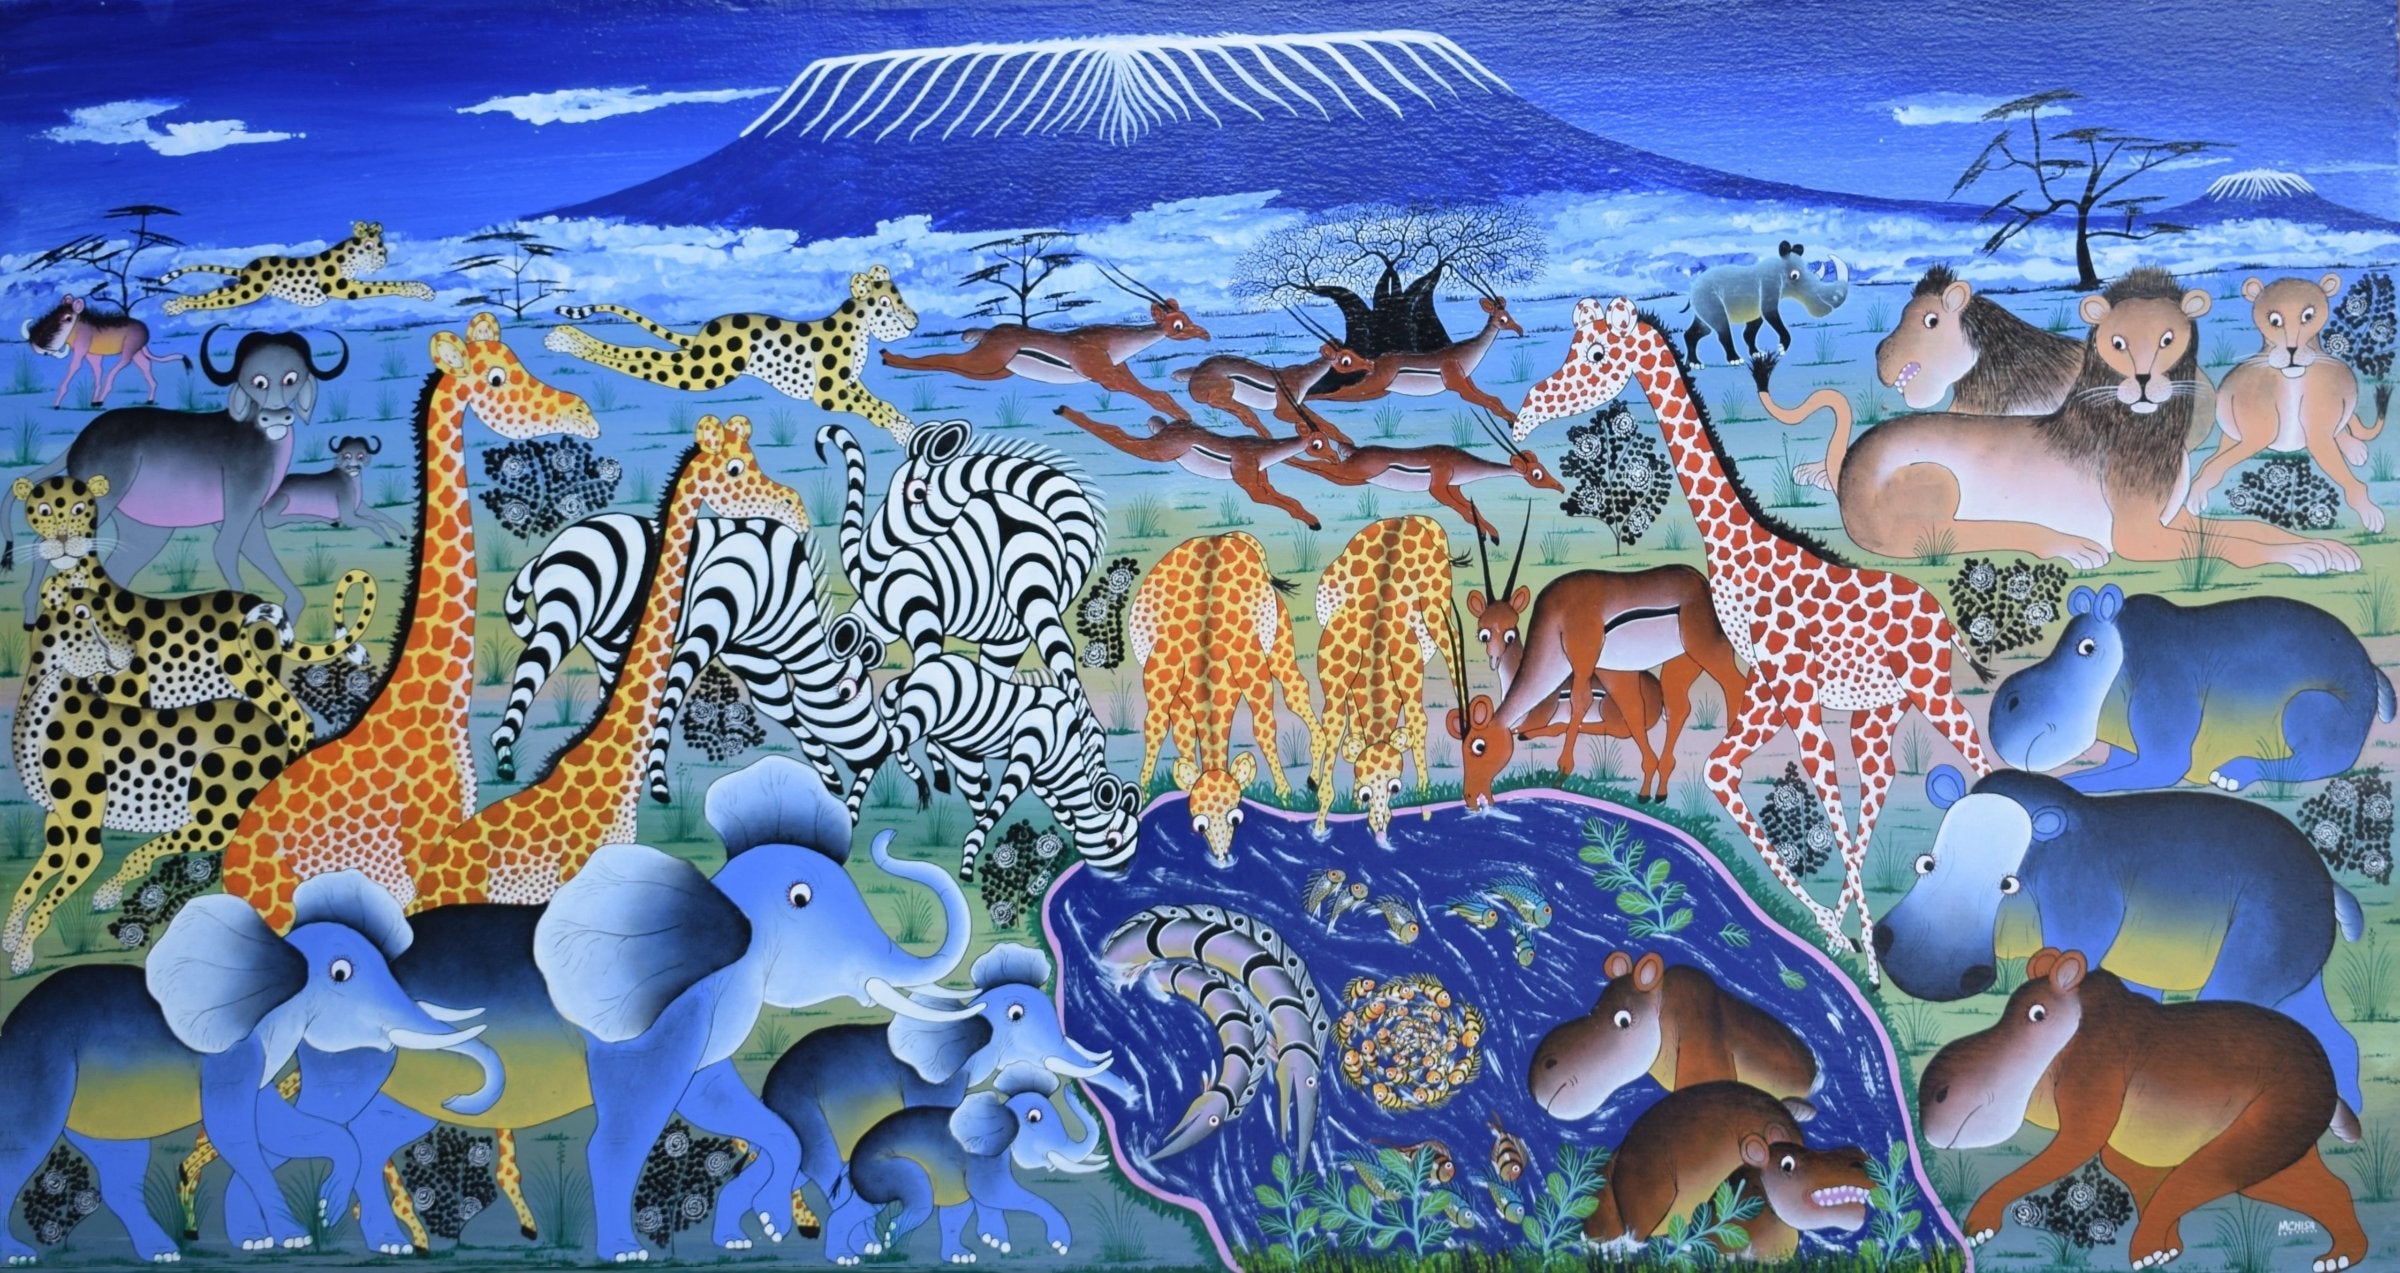 African art of animals in the wild